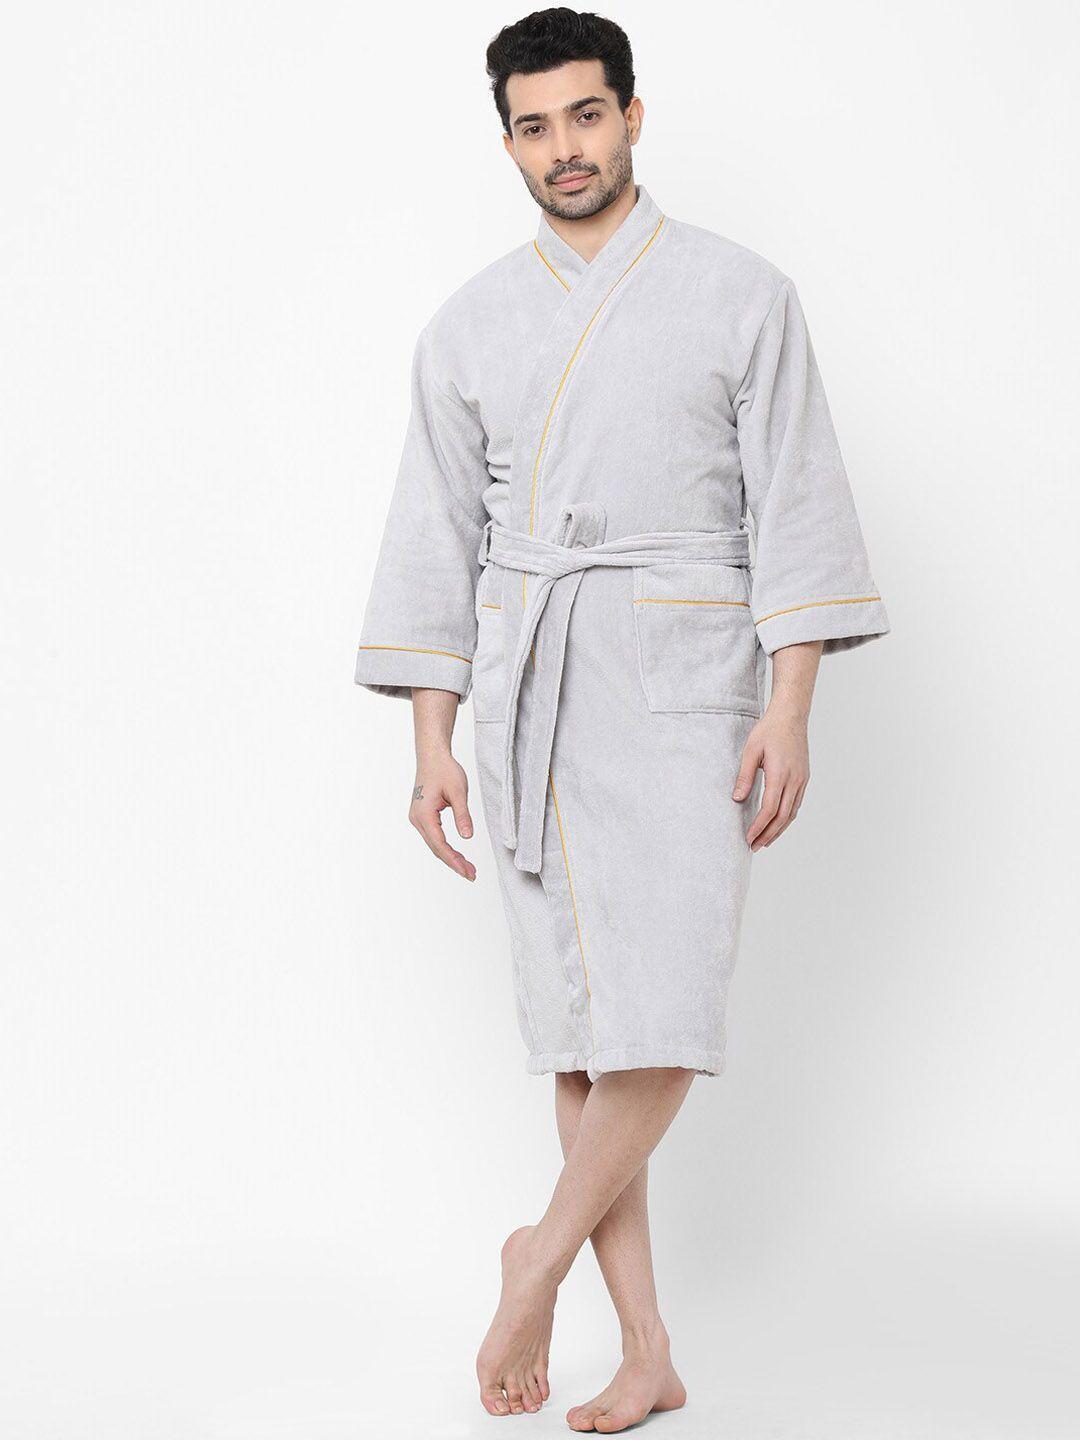 spaces grey solid pure cotton bath robe with belt